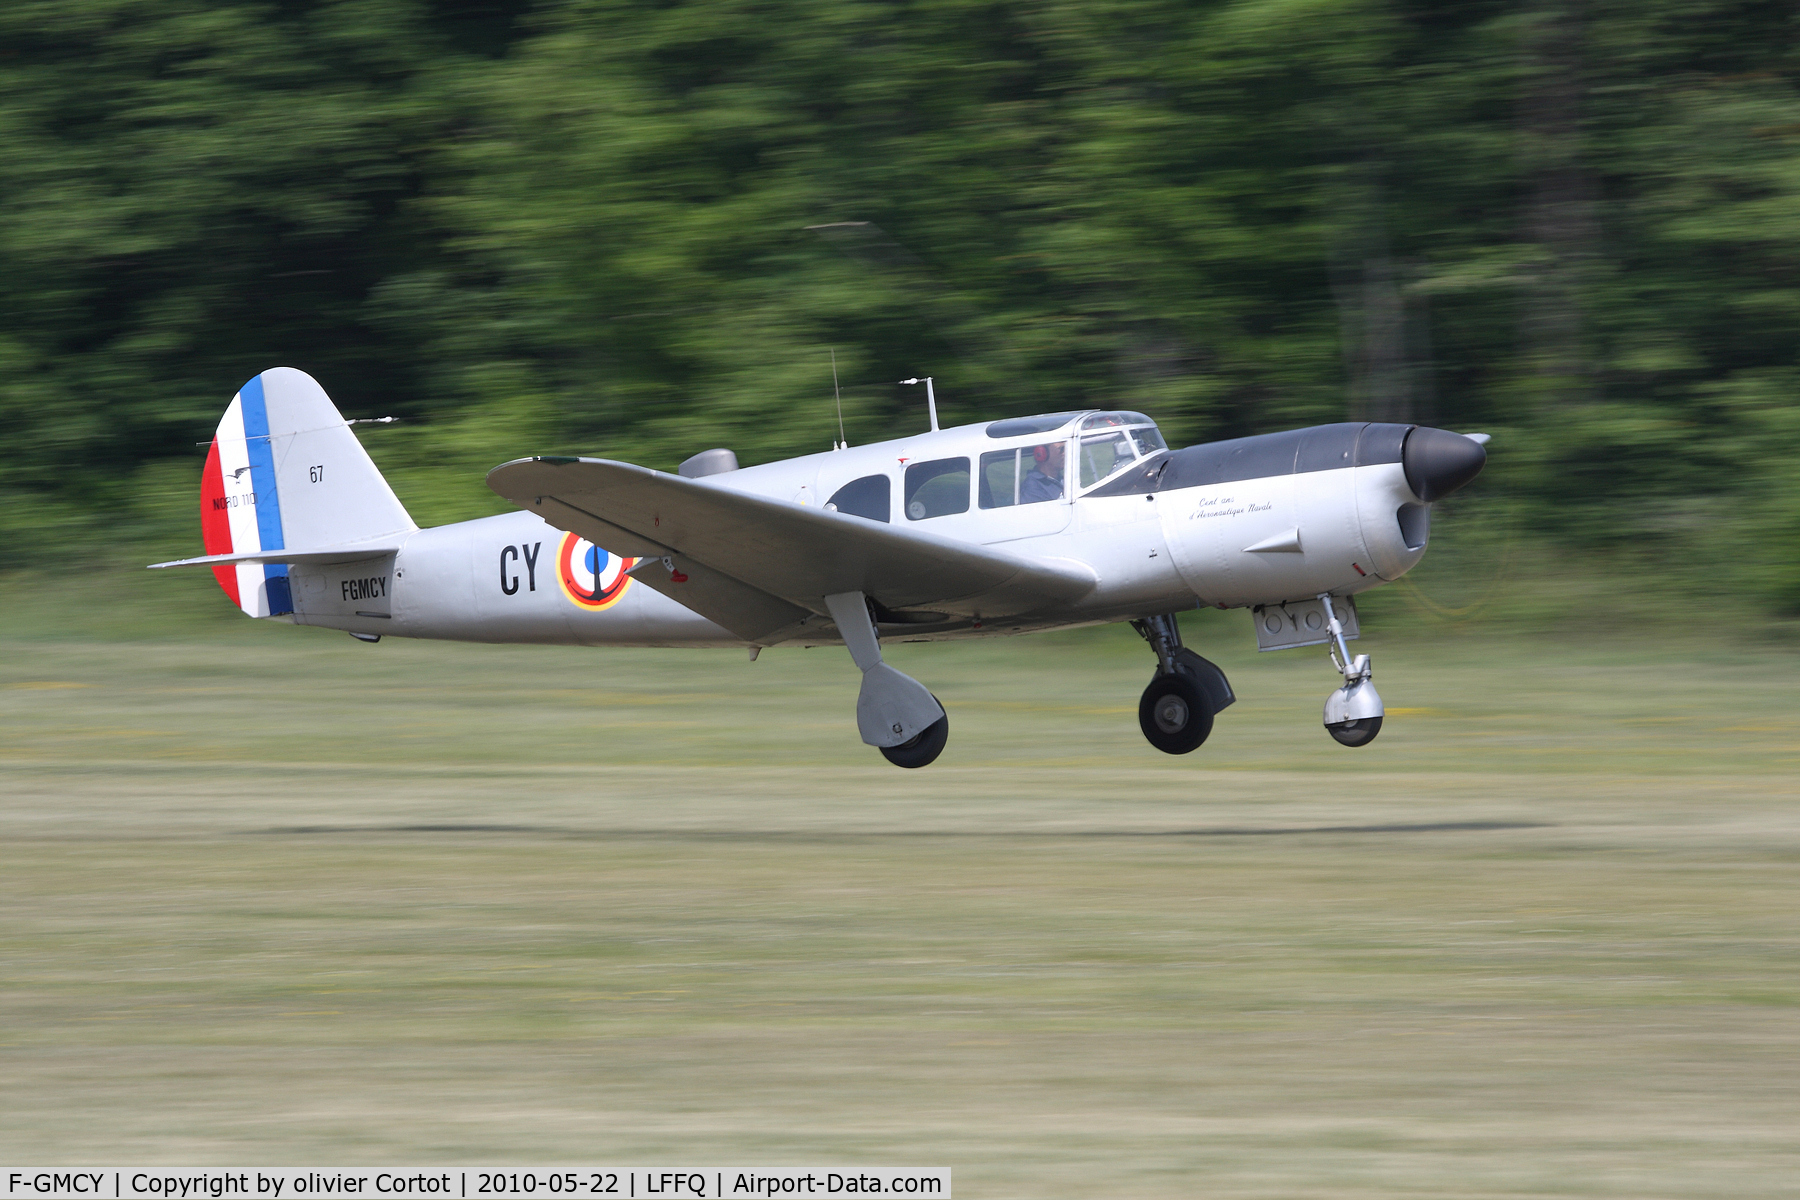 F-GMCY, Nord 1101 Noralpha C/N 67, taking off during the 2010 Ferté Alais airshow